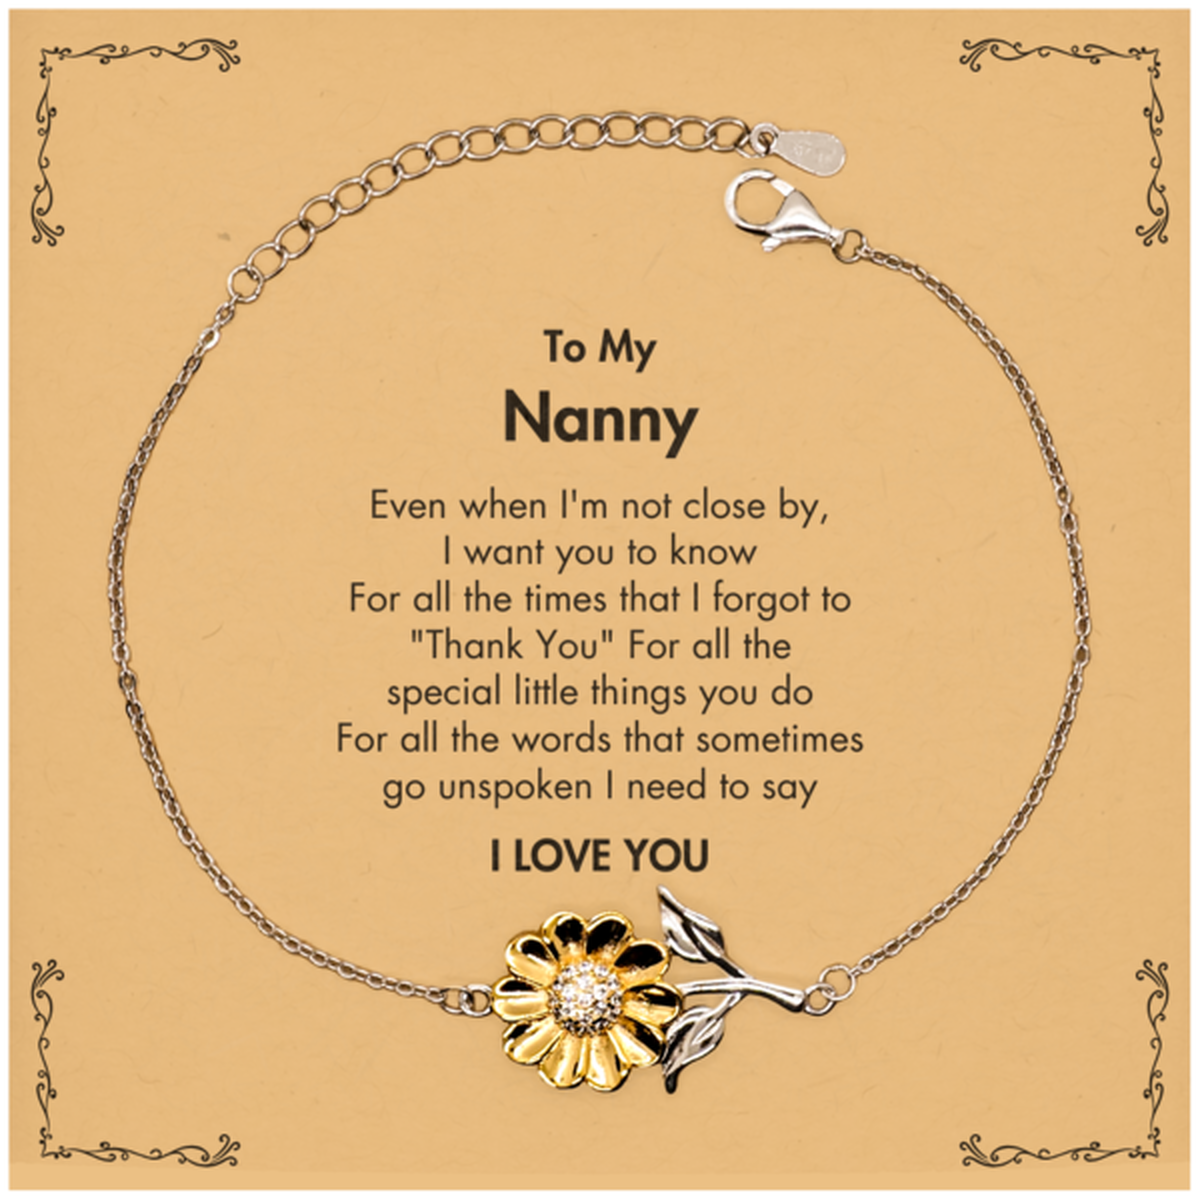 Thank You Gifts for Nanny, Keepsake Sunflower Bracelet Gifts for Nanny Birthday Mother's day Father's Day Nanny For all the words That sometimes go unspoken I need to say I LOVE YOU